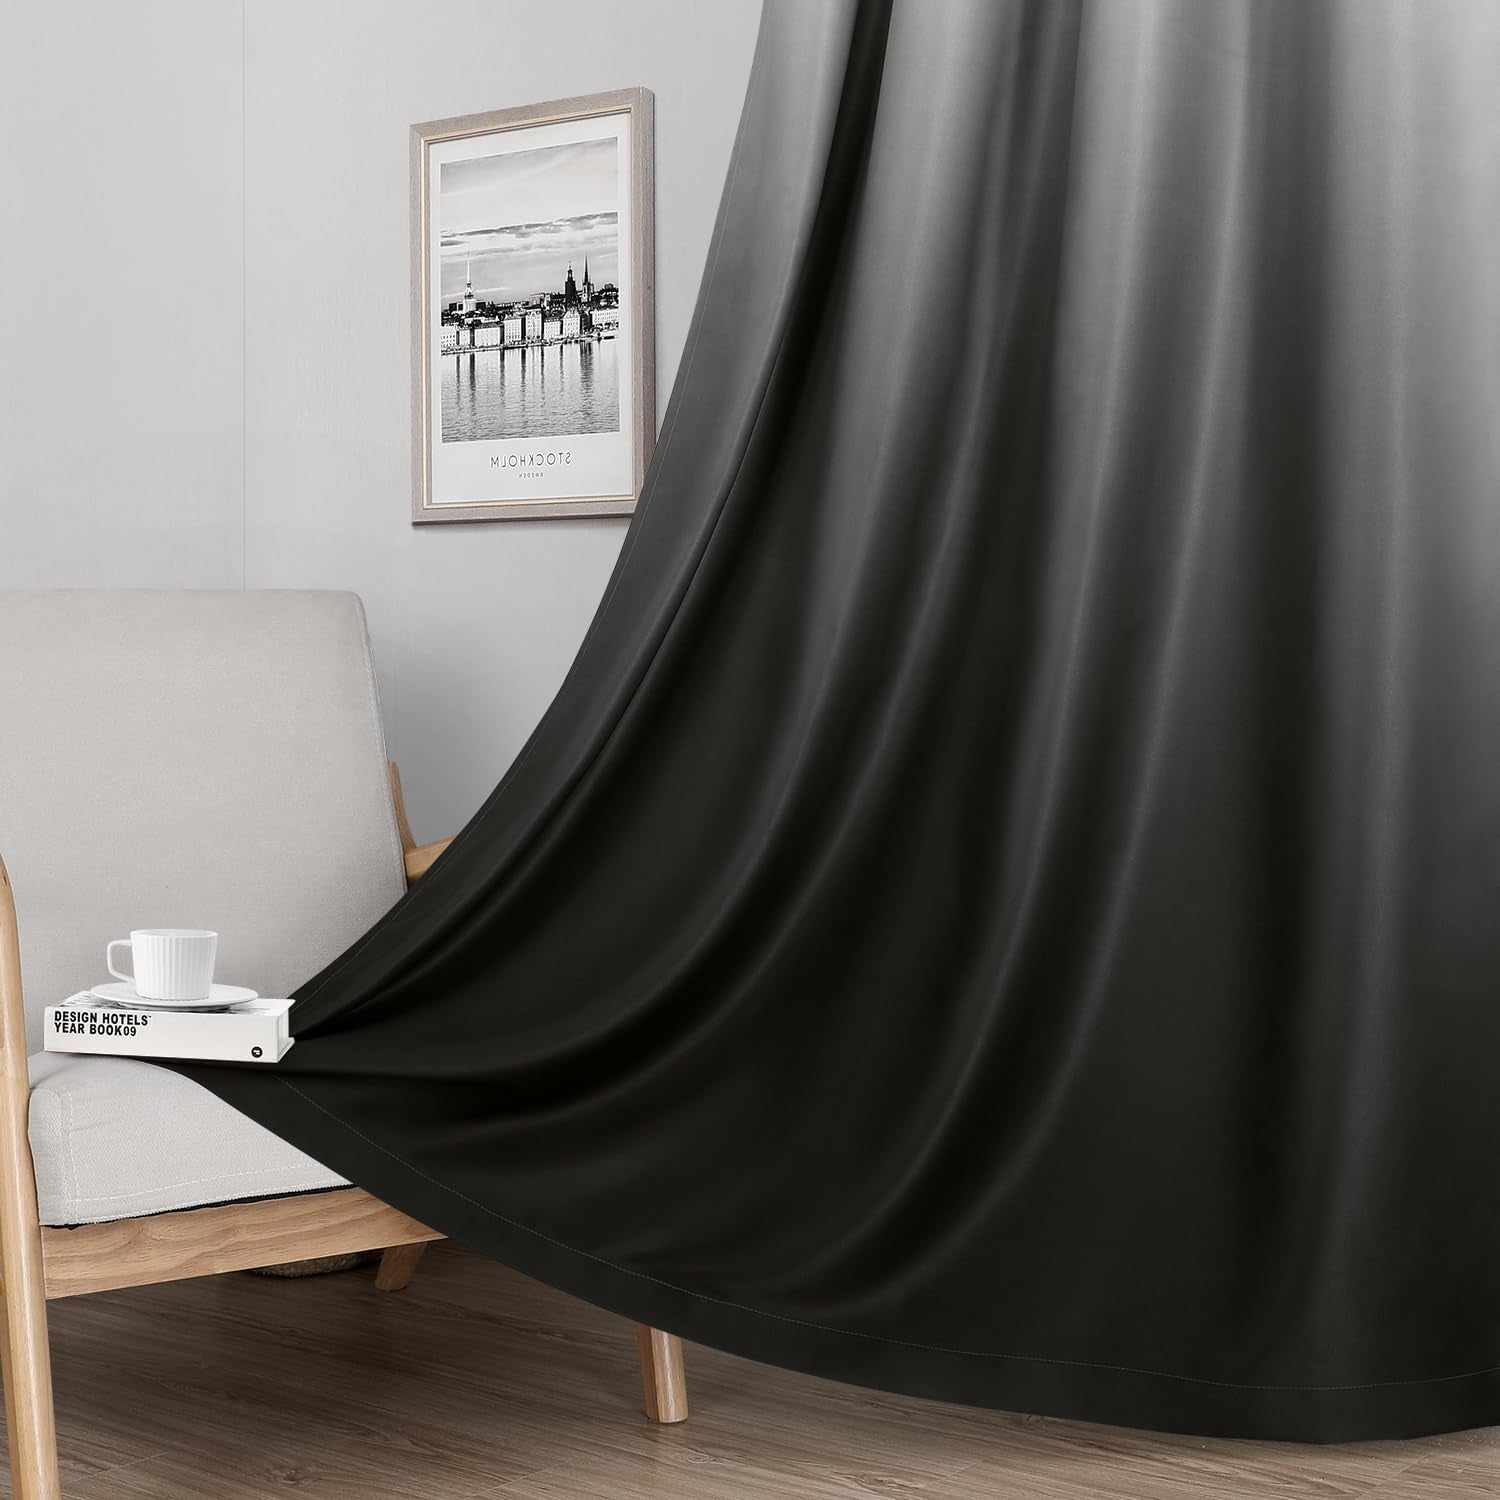 HOMEIDEAS 100% Black Ombre Blackout Curtains for Bedroom, Room Darkening Curtains 52 X 84 Inches Long Grommet Gradient Drapes, Light Blocking Thermal Insulated Curtains for Living Room, 2 Panels  HOMEIDEAS   